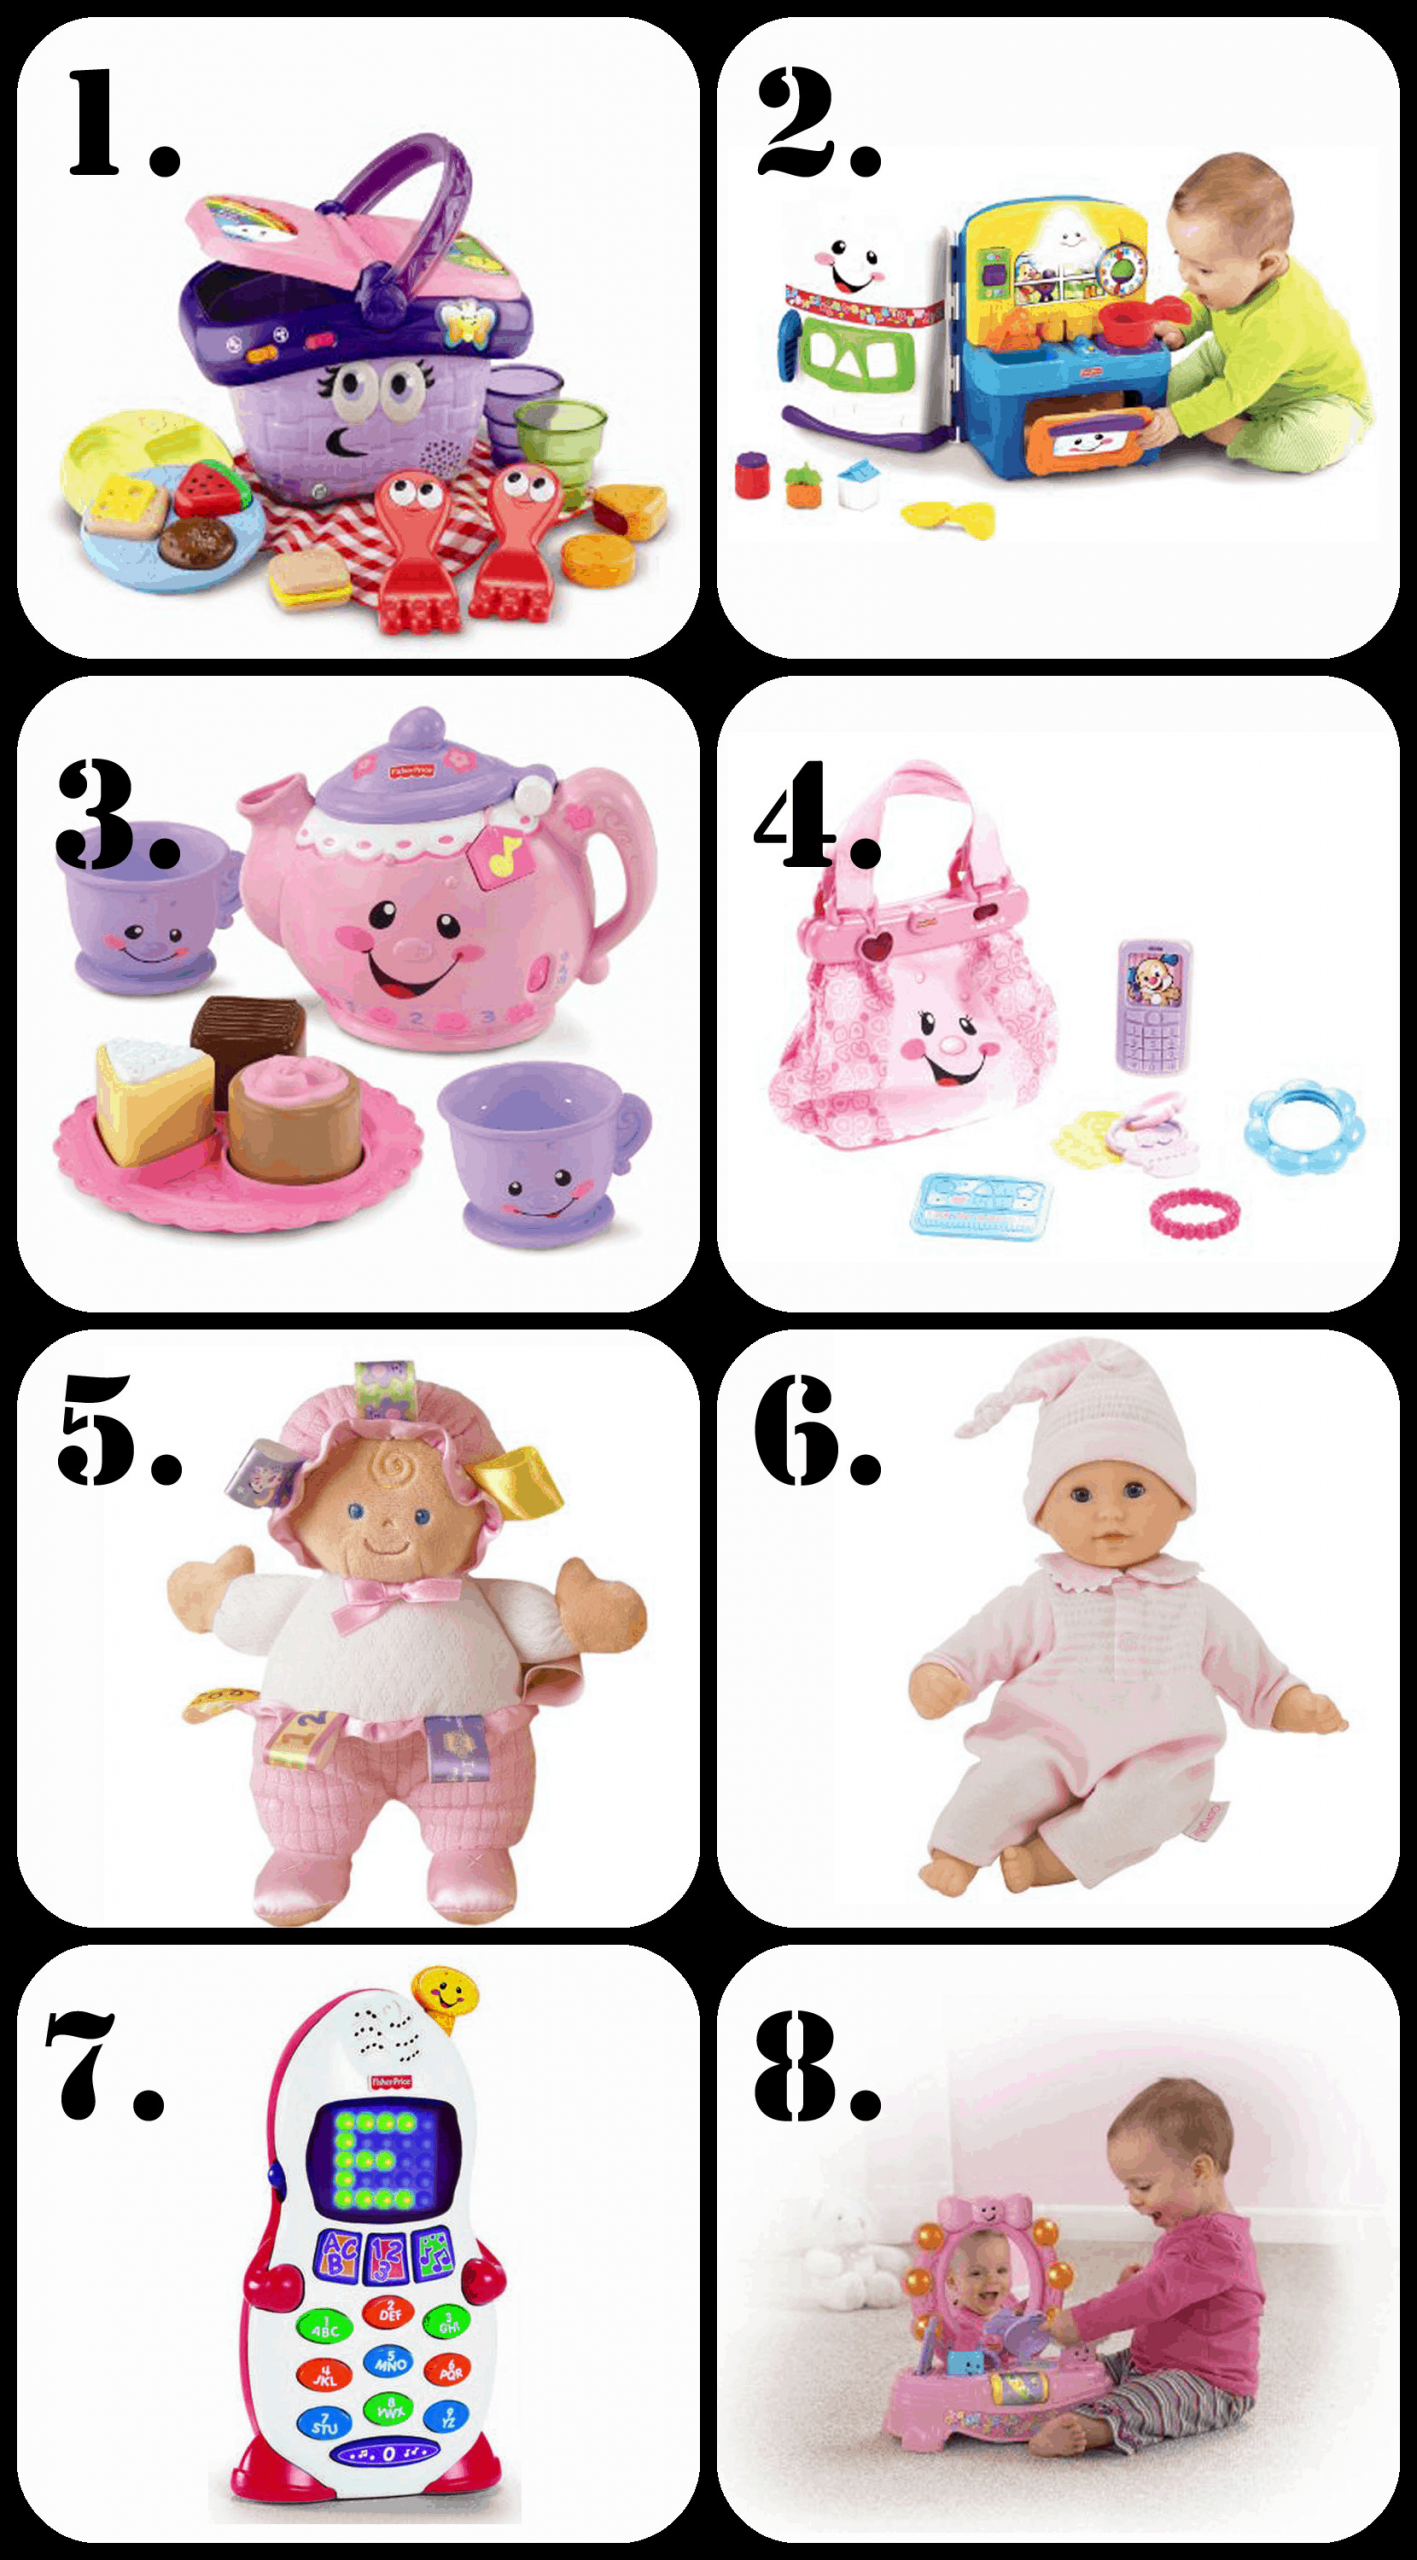 Best Gift Ideas For 1 Year Old Baby Girl
 BEST Gifts for a 1 Year Old Girl • The Pinning Mama